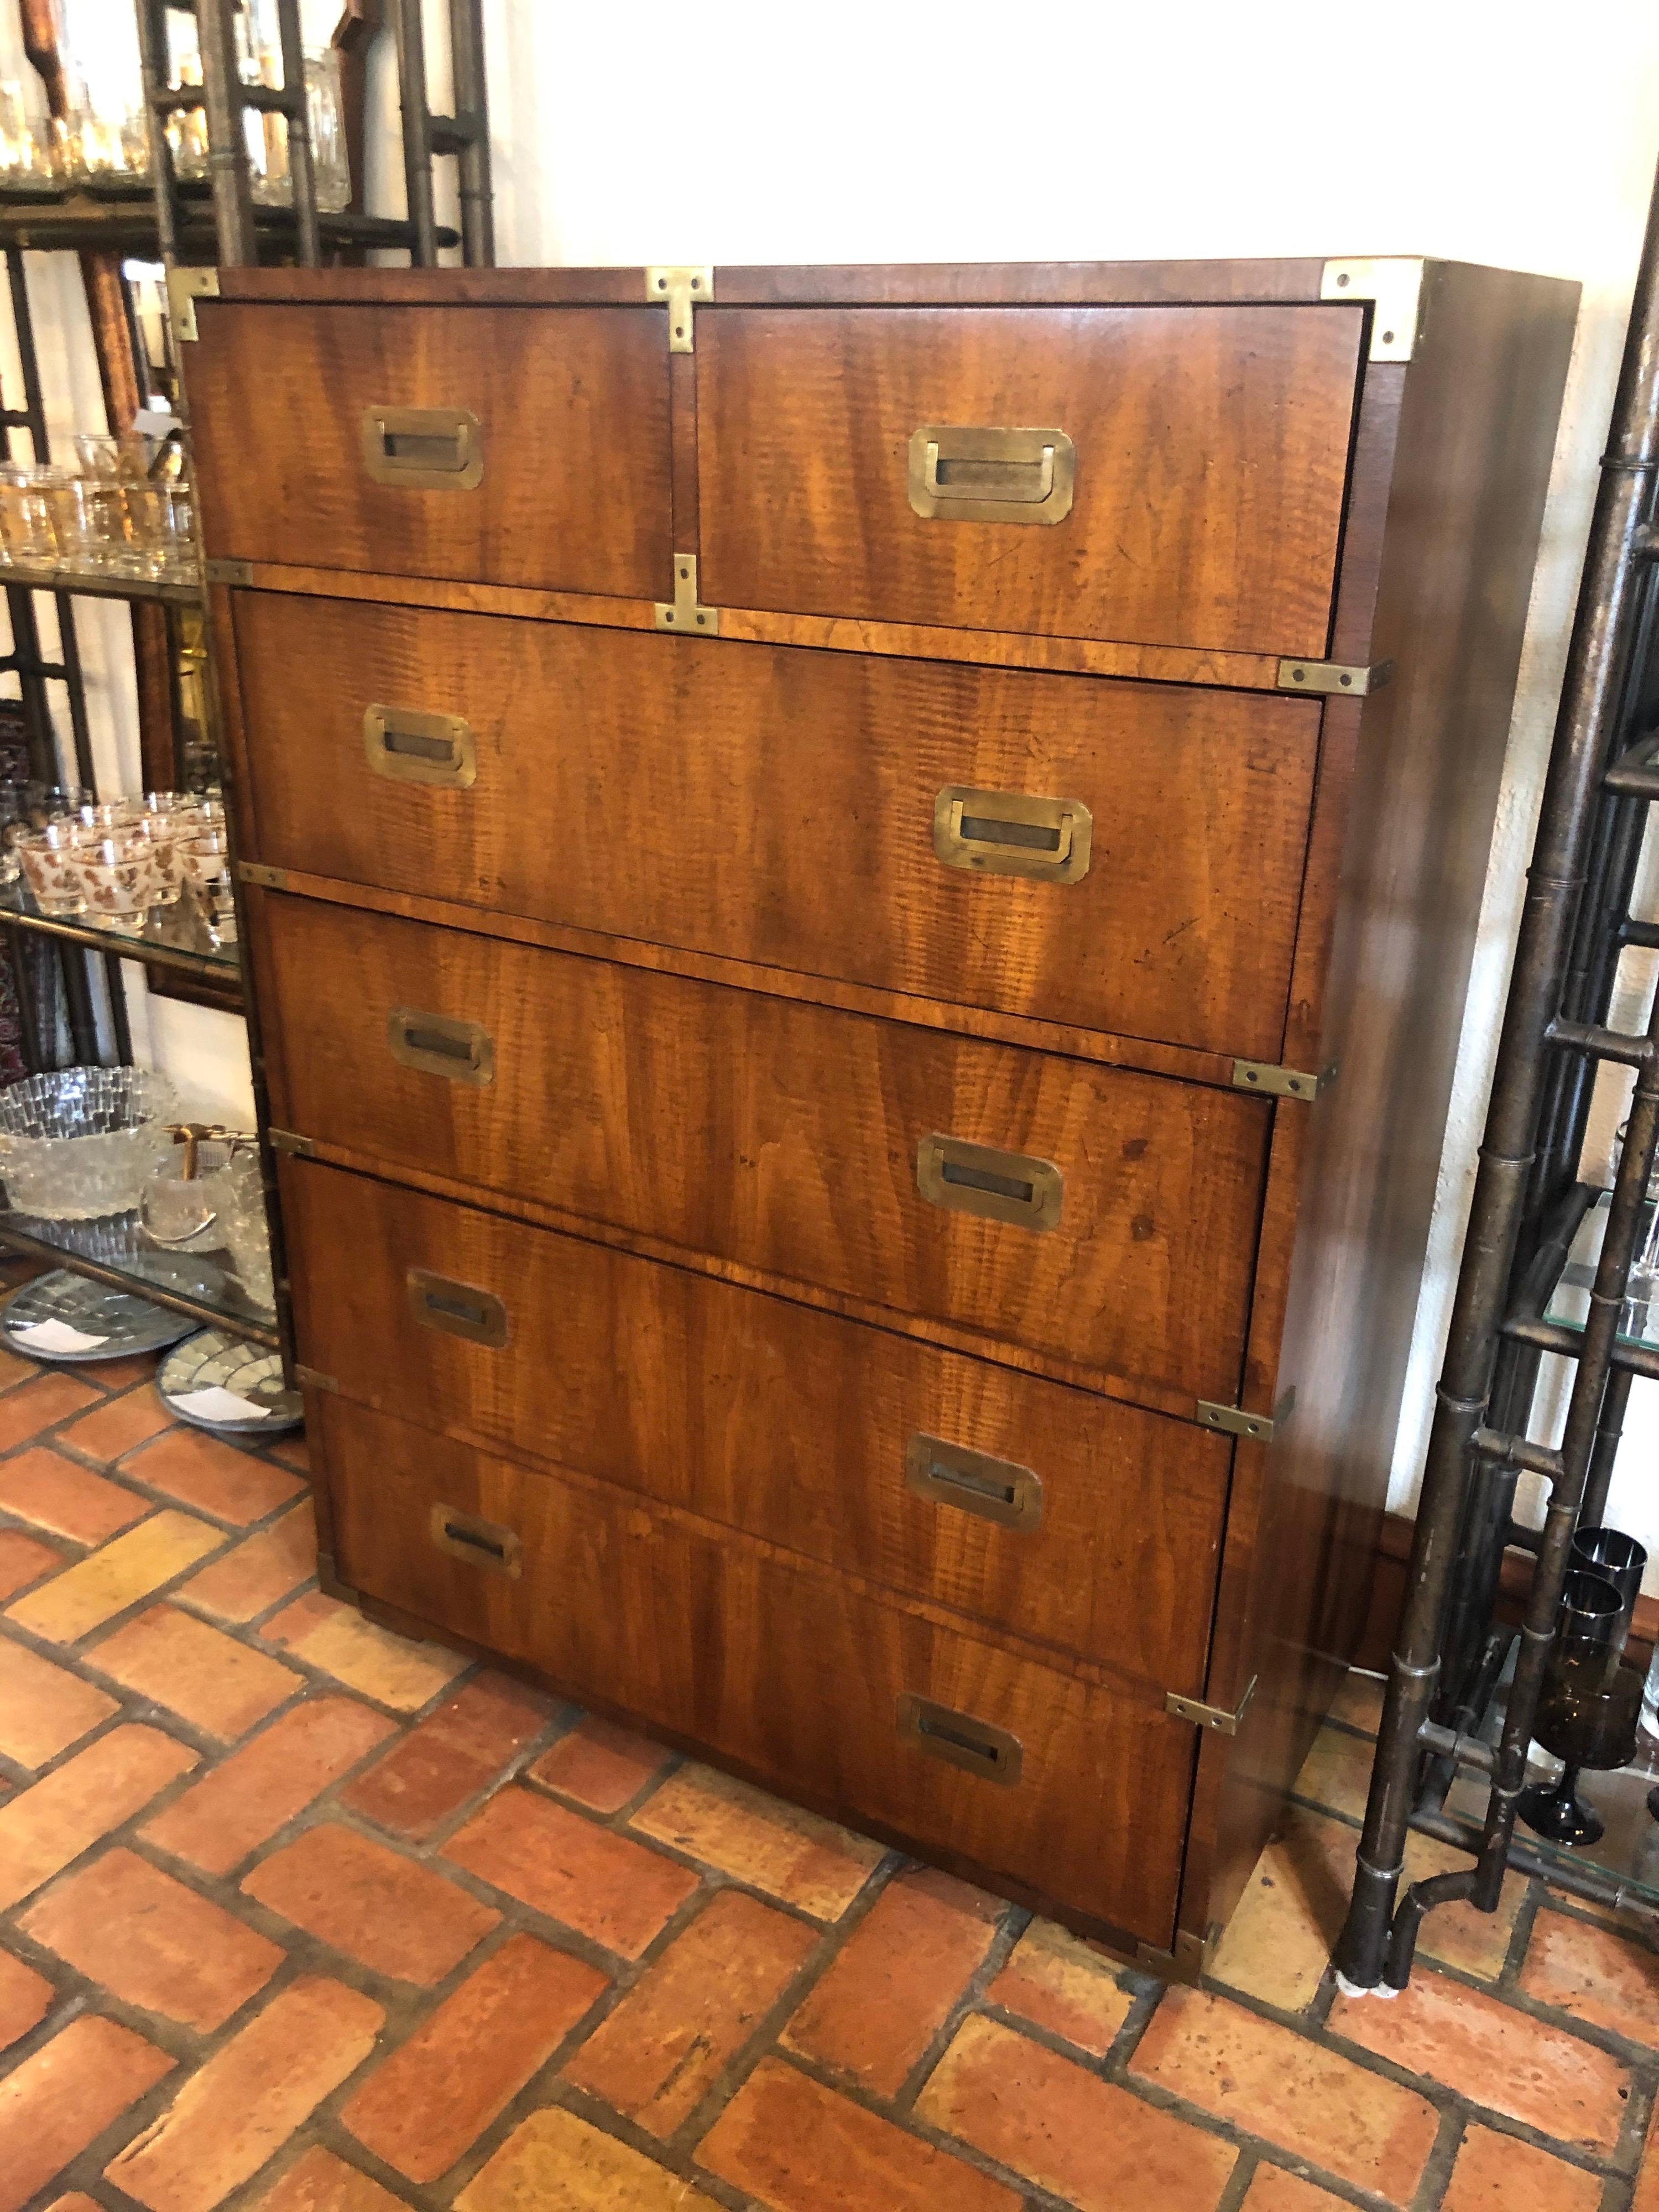 Henredon Style Campaign high boy dresser in walnut. Lots of storage in this walnut beauty.
Brass accents adorn this classic, timeless piece. In excellent vintage condition.